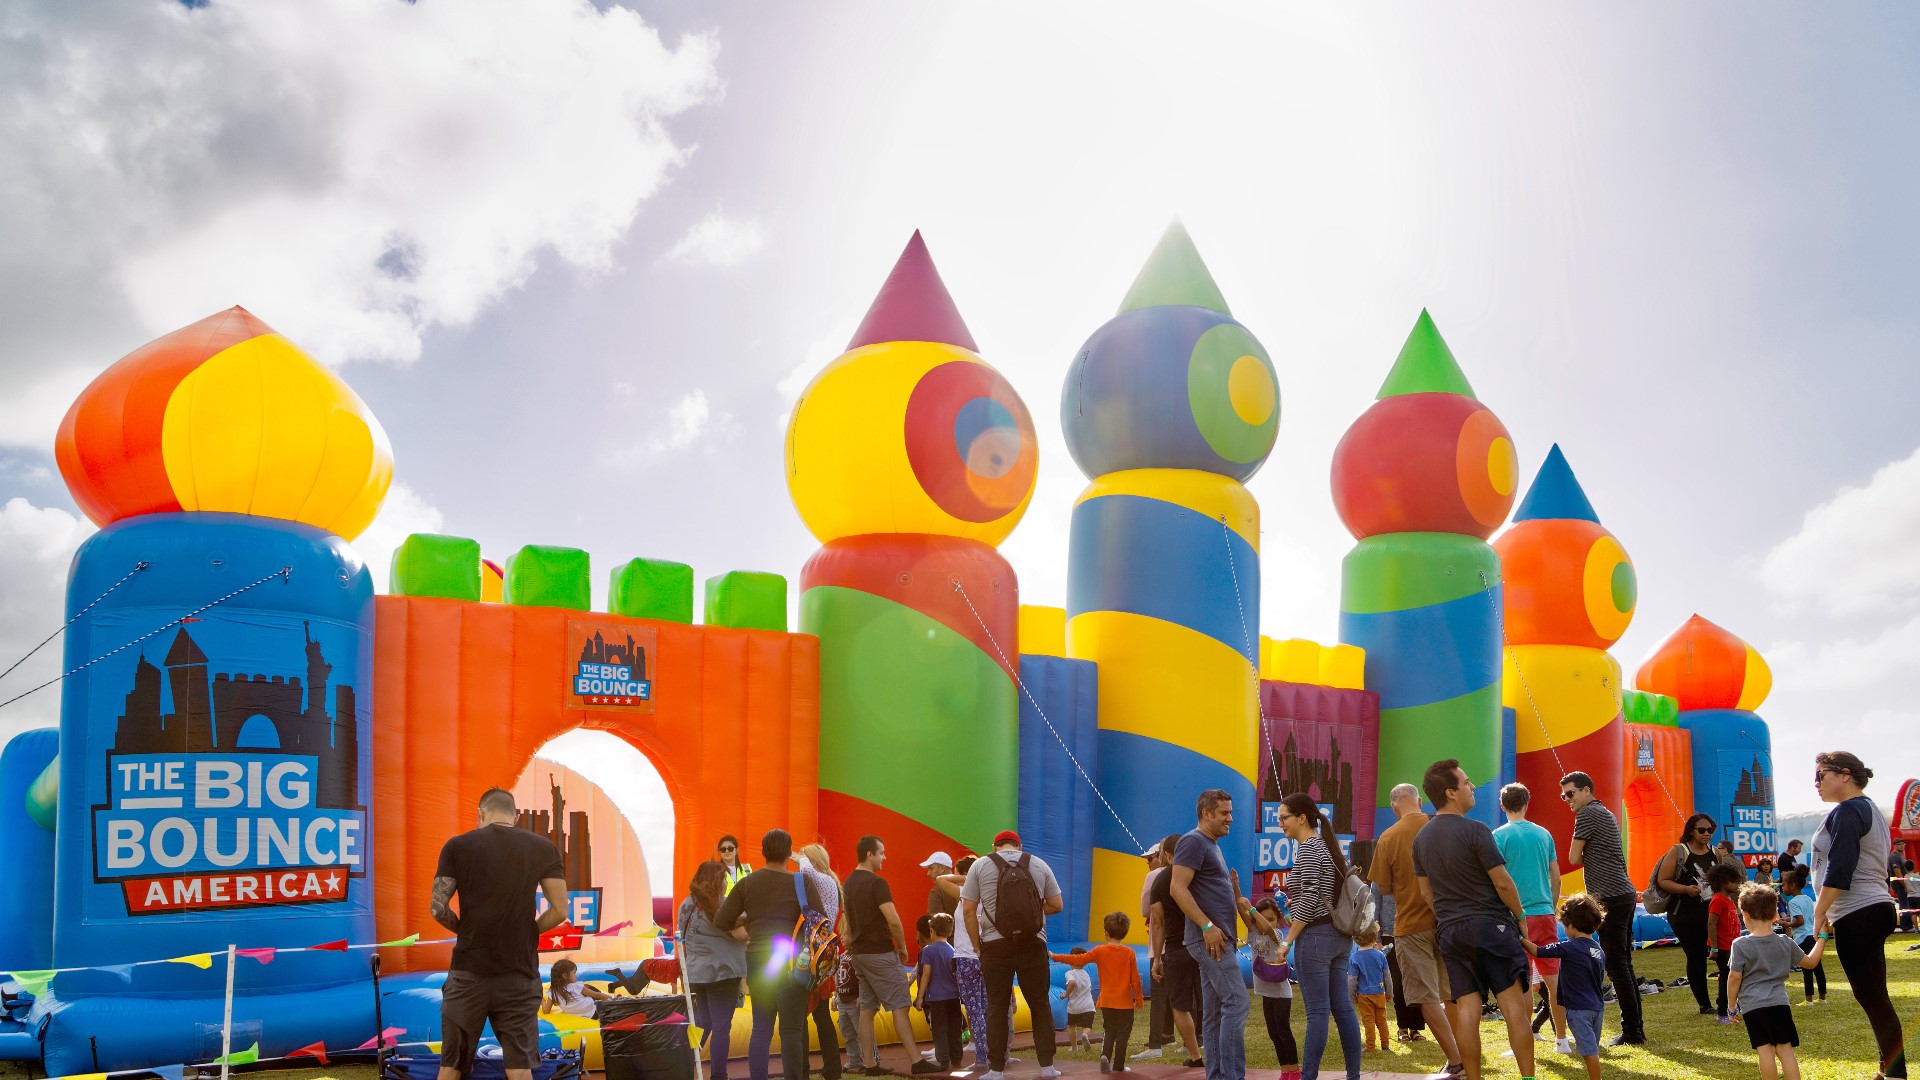 The World's Largest Bounce House is set to come to Murfin Fields in Grove City from July 15 to July 17.